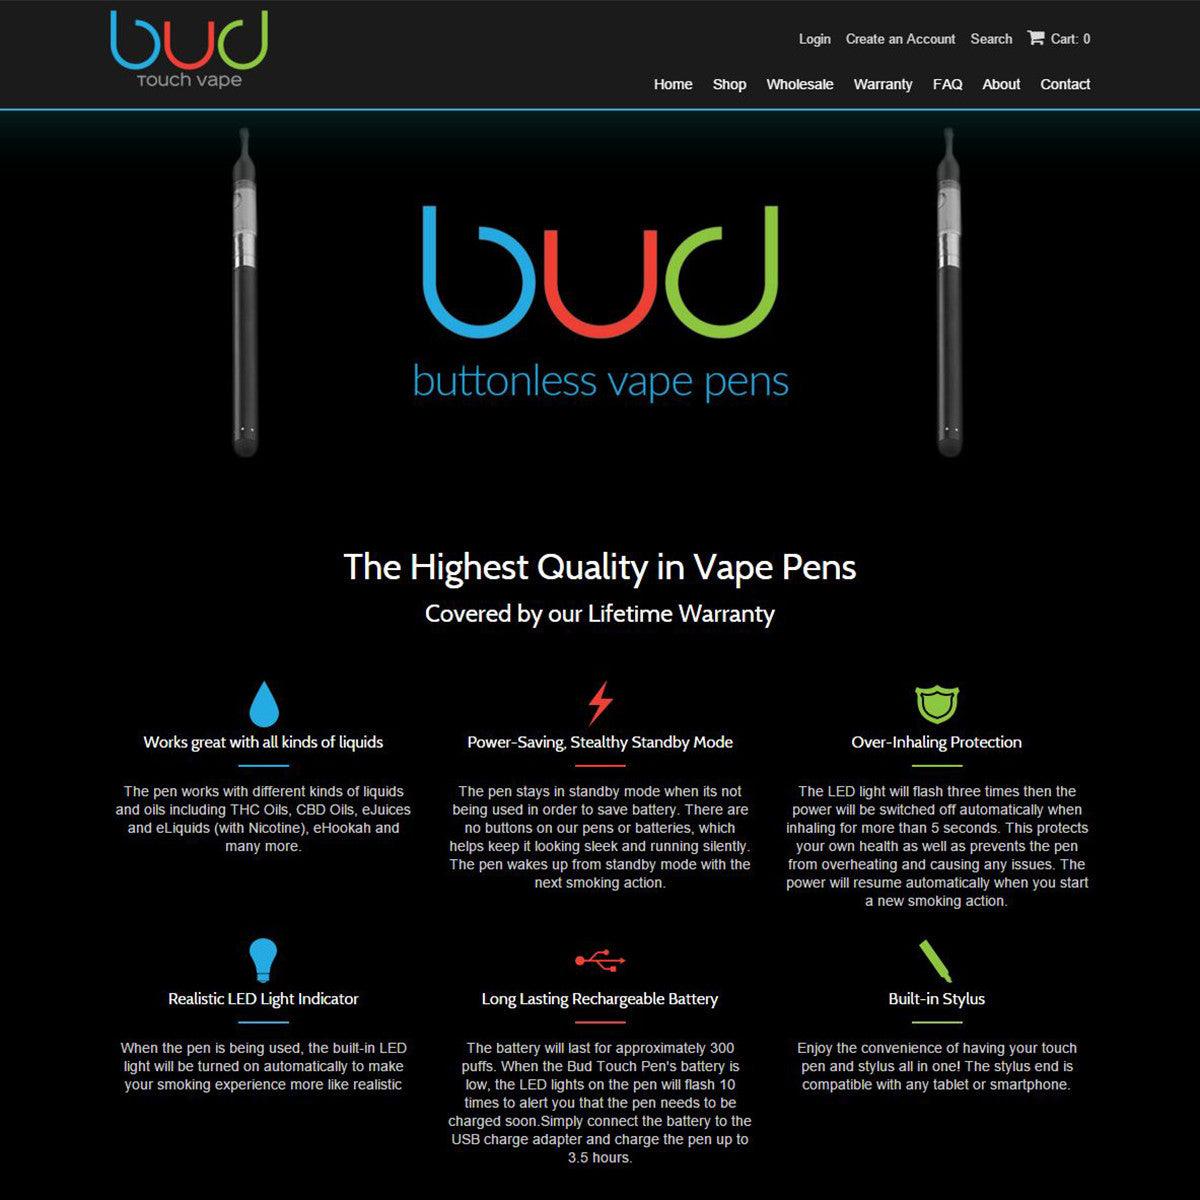 Bud Touch Vape - Photography and Web Design - Los Angeles, US based Shopify Experts Revo Designs